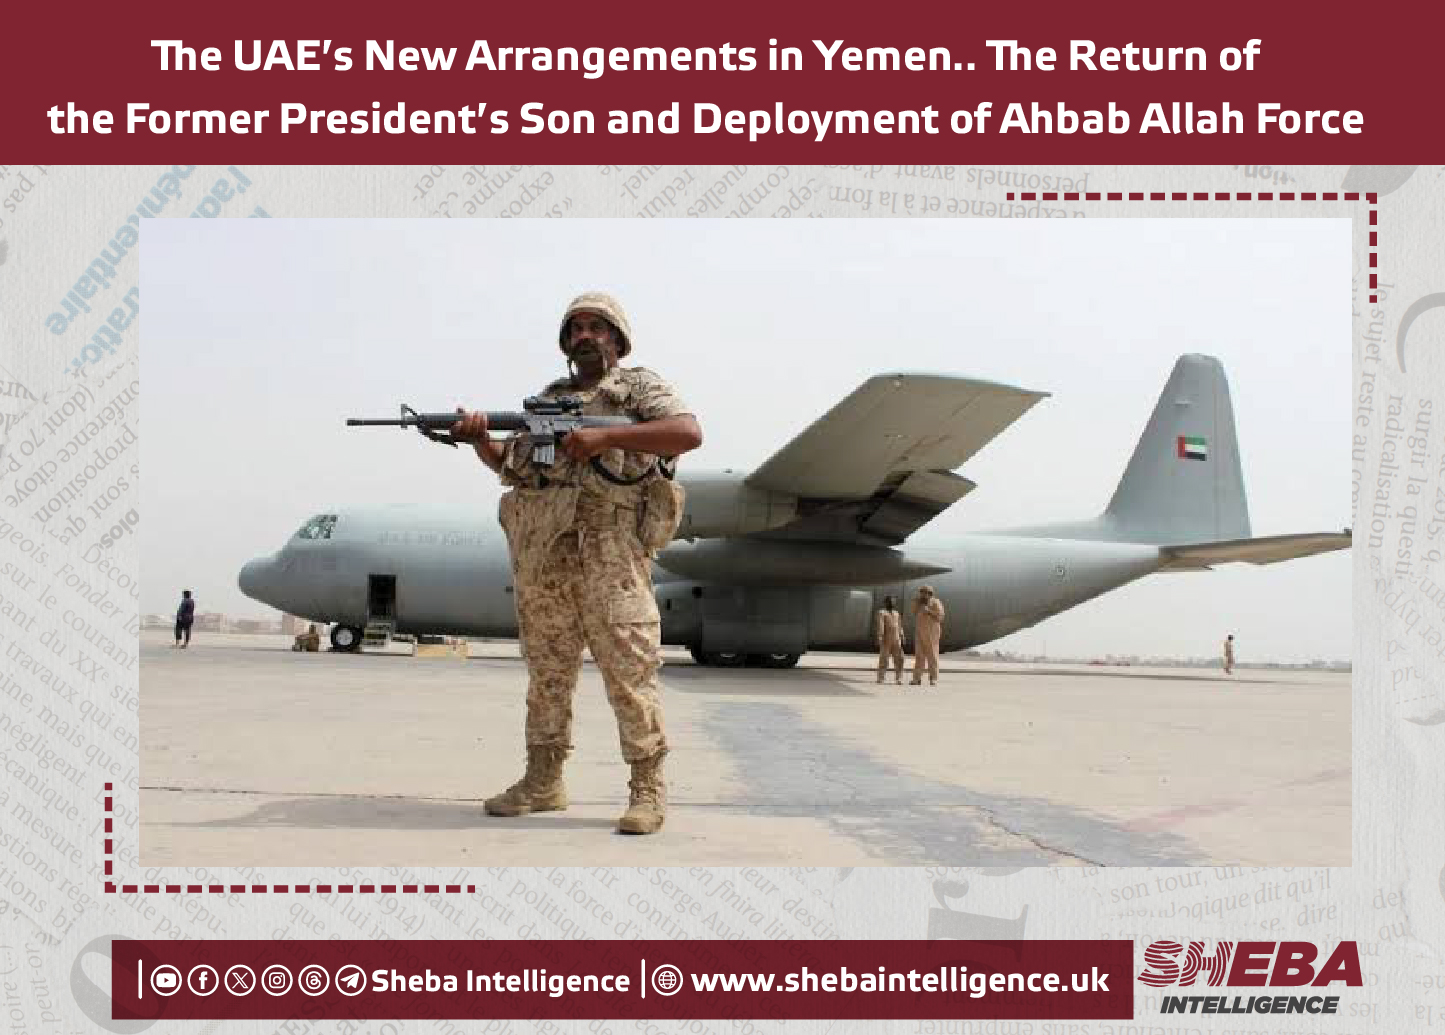 The UAE's New Arrangements in Yemen.. The Return of the Former President's Son and Deployment of Ahbab Allah Force